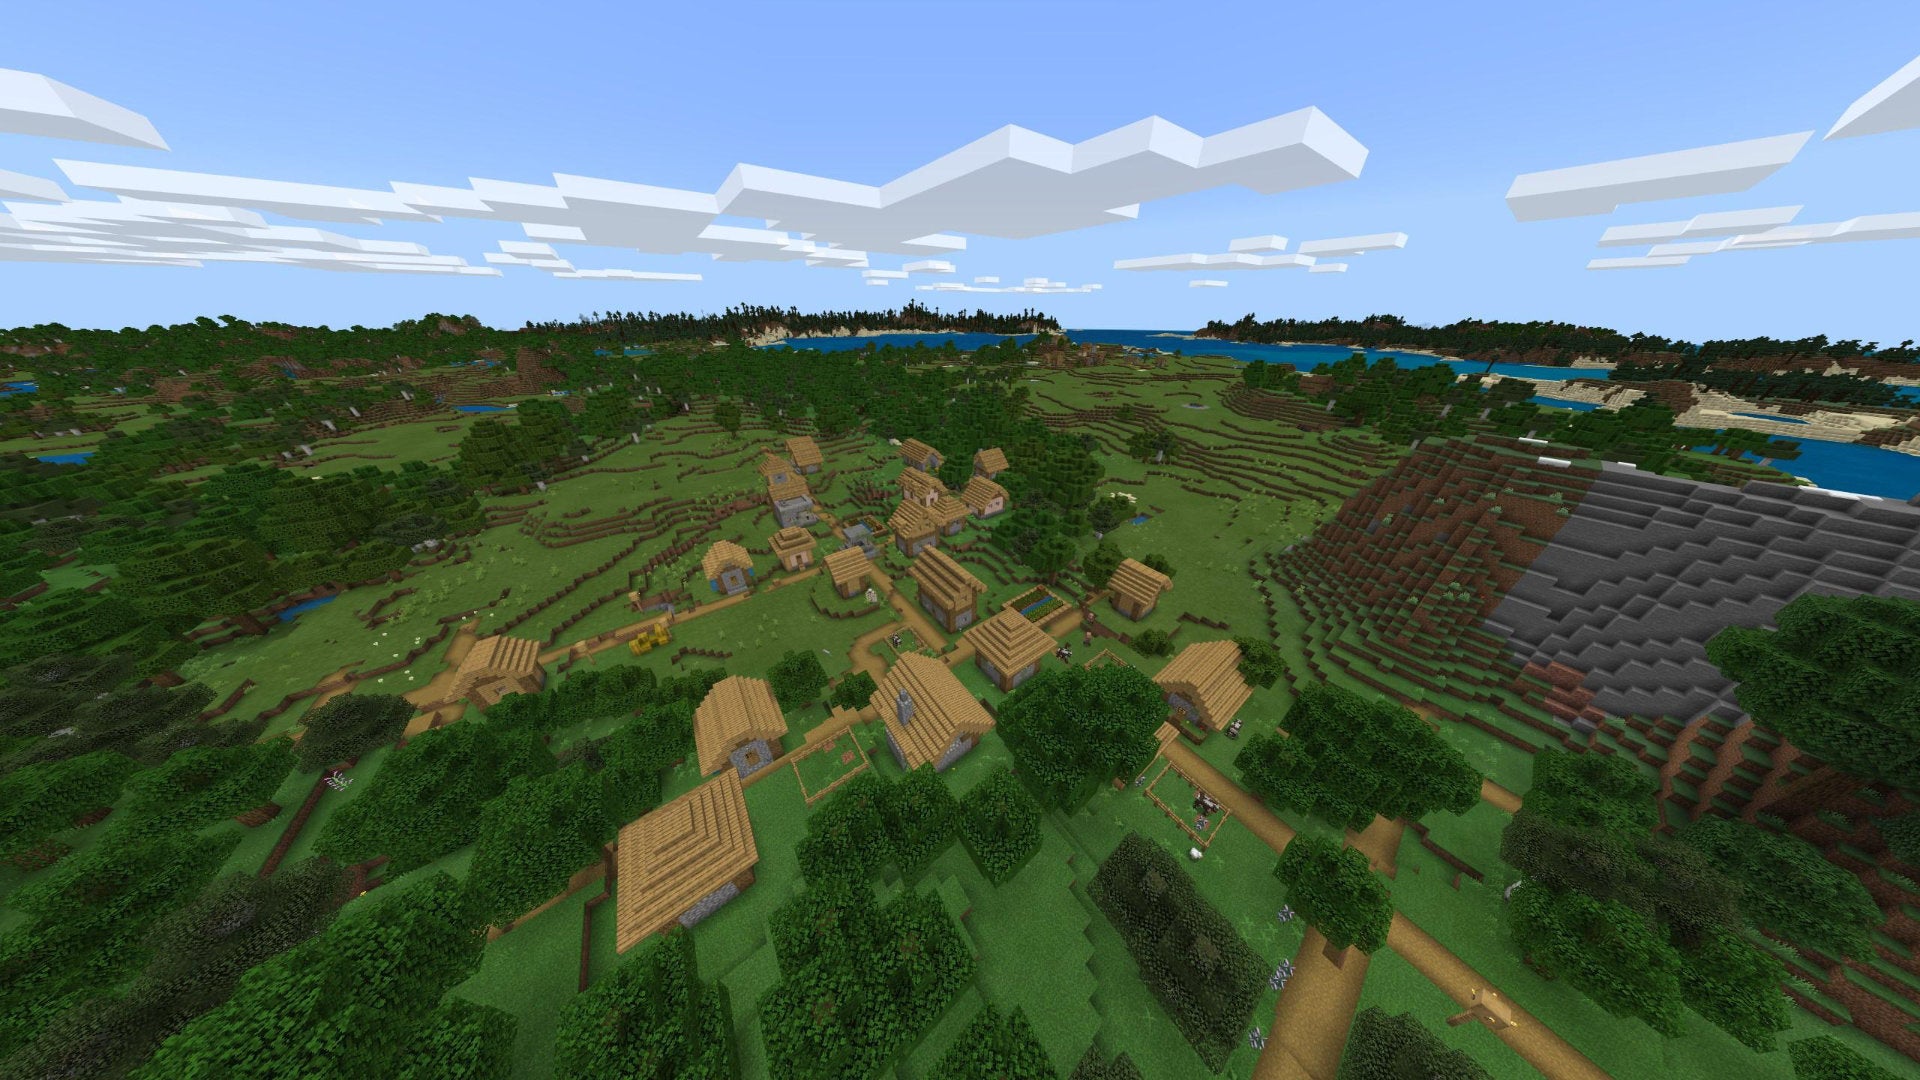 A Minecraft Bedrock screenshot of a new world created with the seed -850418298.